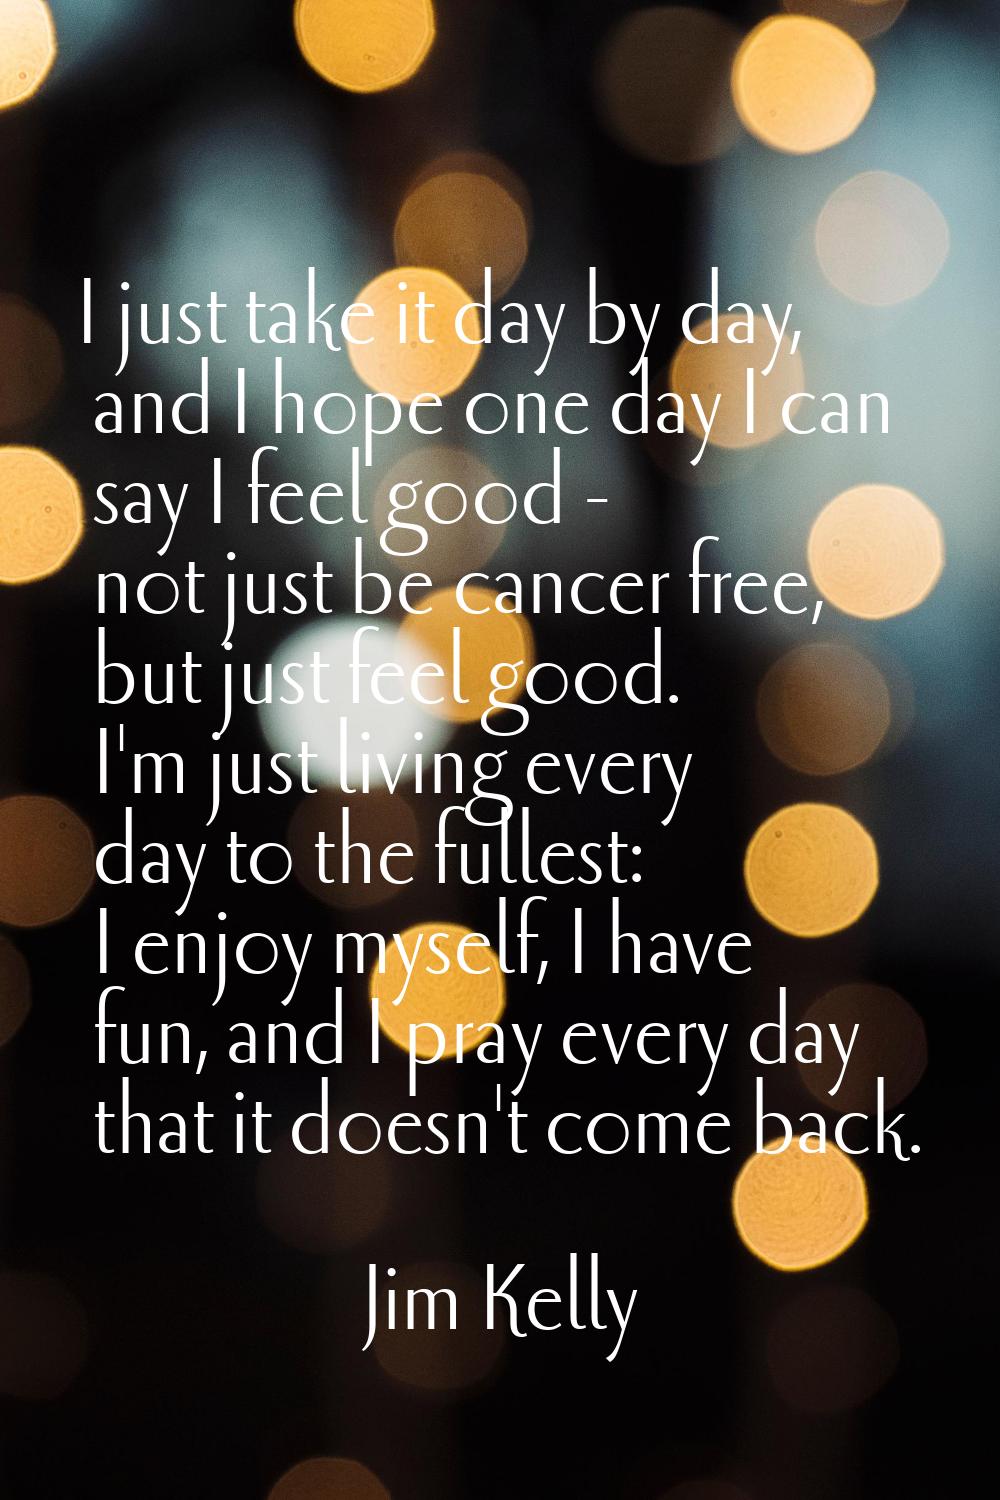 I just take it day by day, and I hope one day I can say I feel good - not just be cancer free, but 